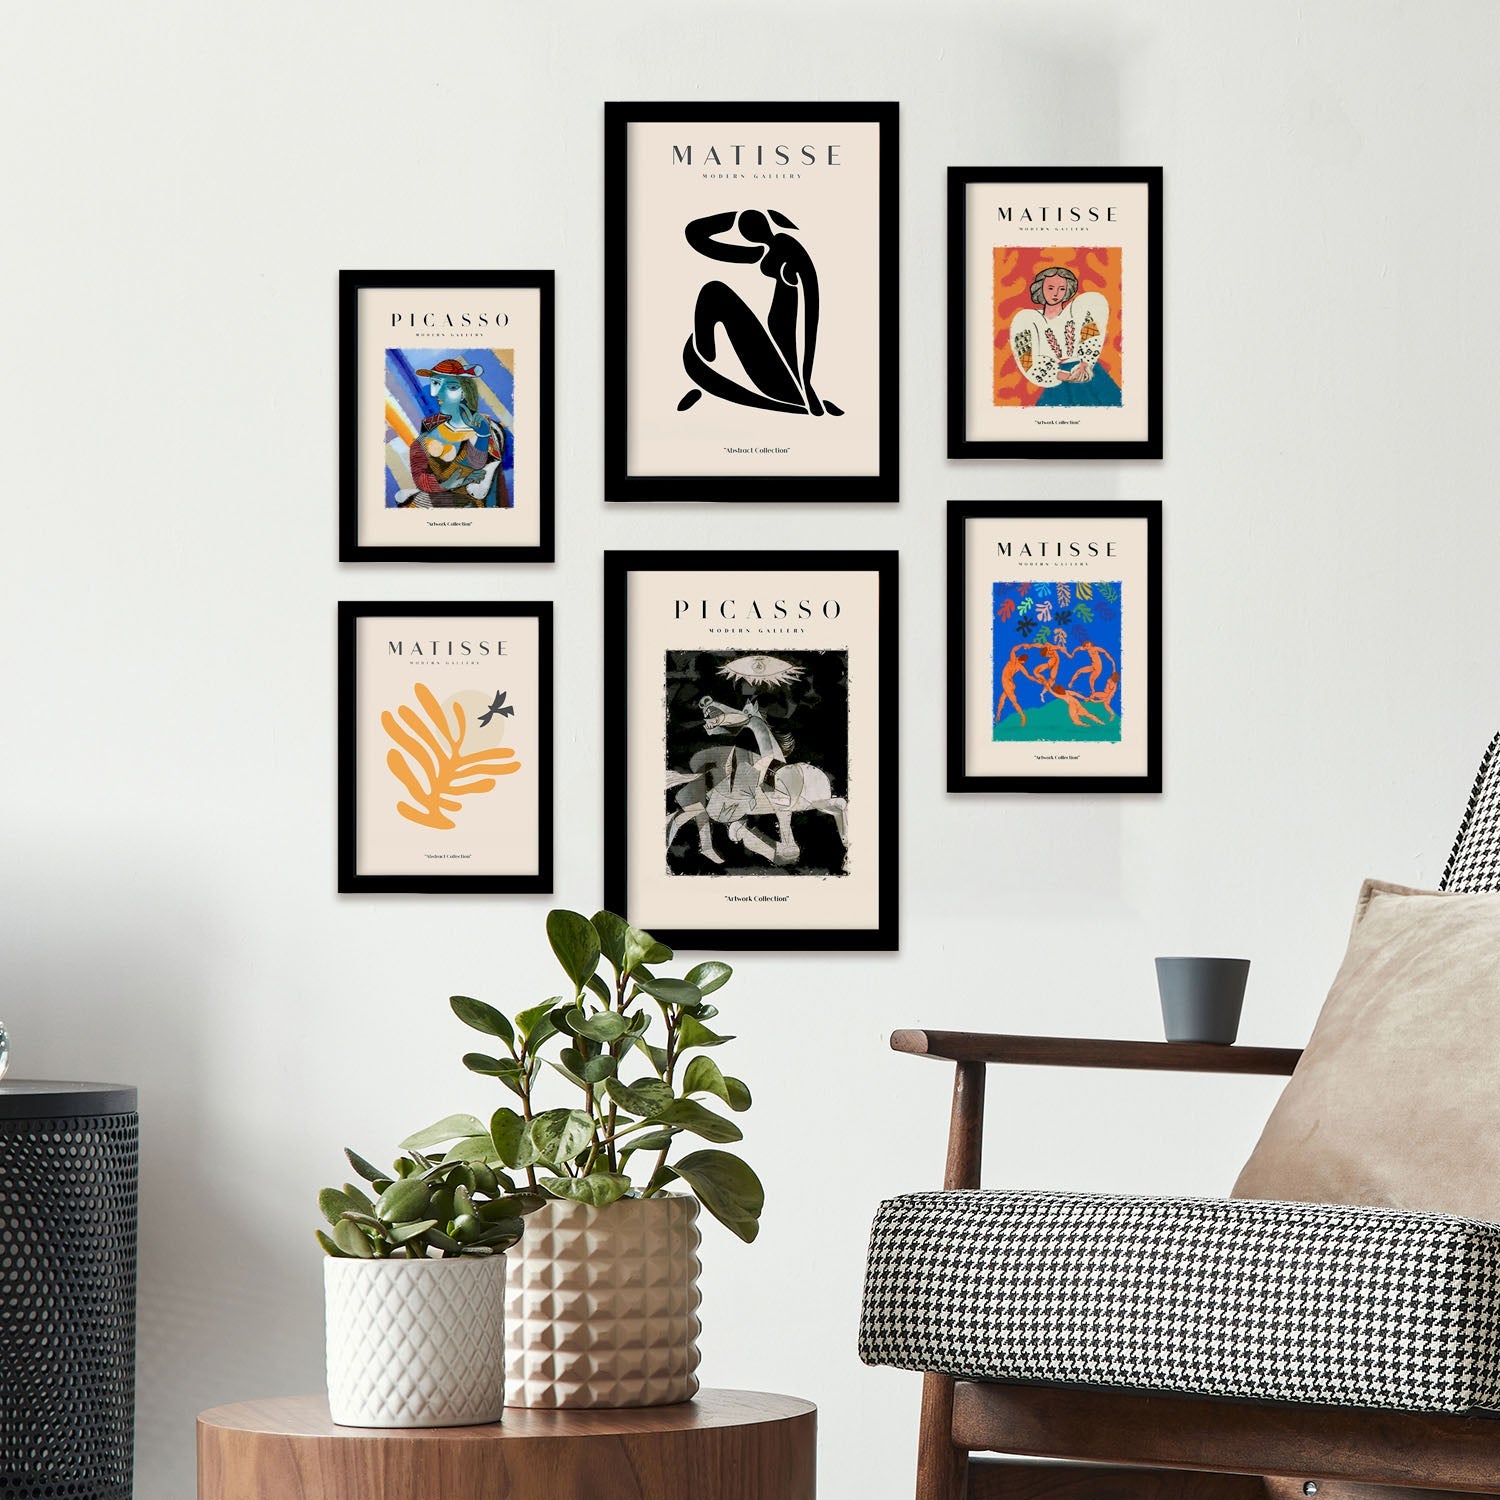 Picasso and Matisse Posters. Abstract Paintings. Fauvism and Surrealism Art Gallery-Artwork-Nacnic-Nacnic Estudio SL